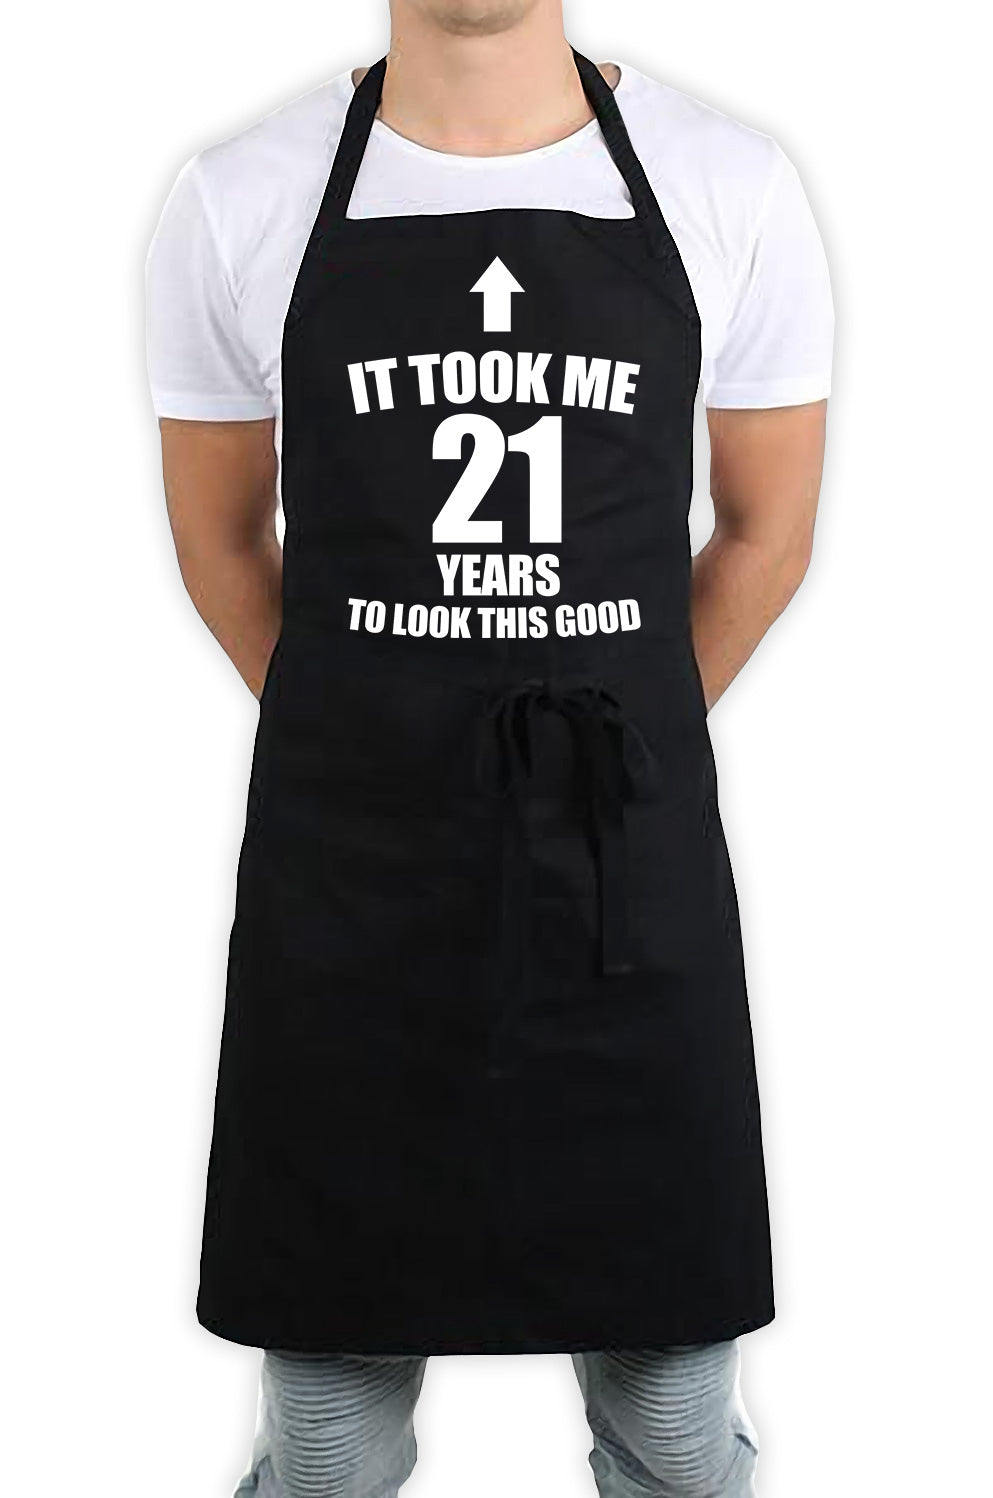 It Took Me 21 Years To Look This Good Funny Kitchen BBQ Apron Black